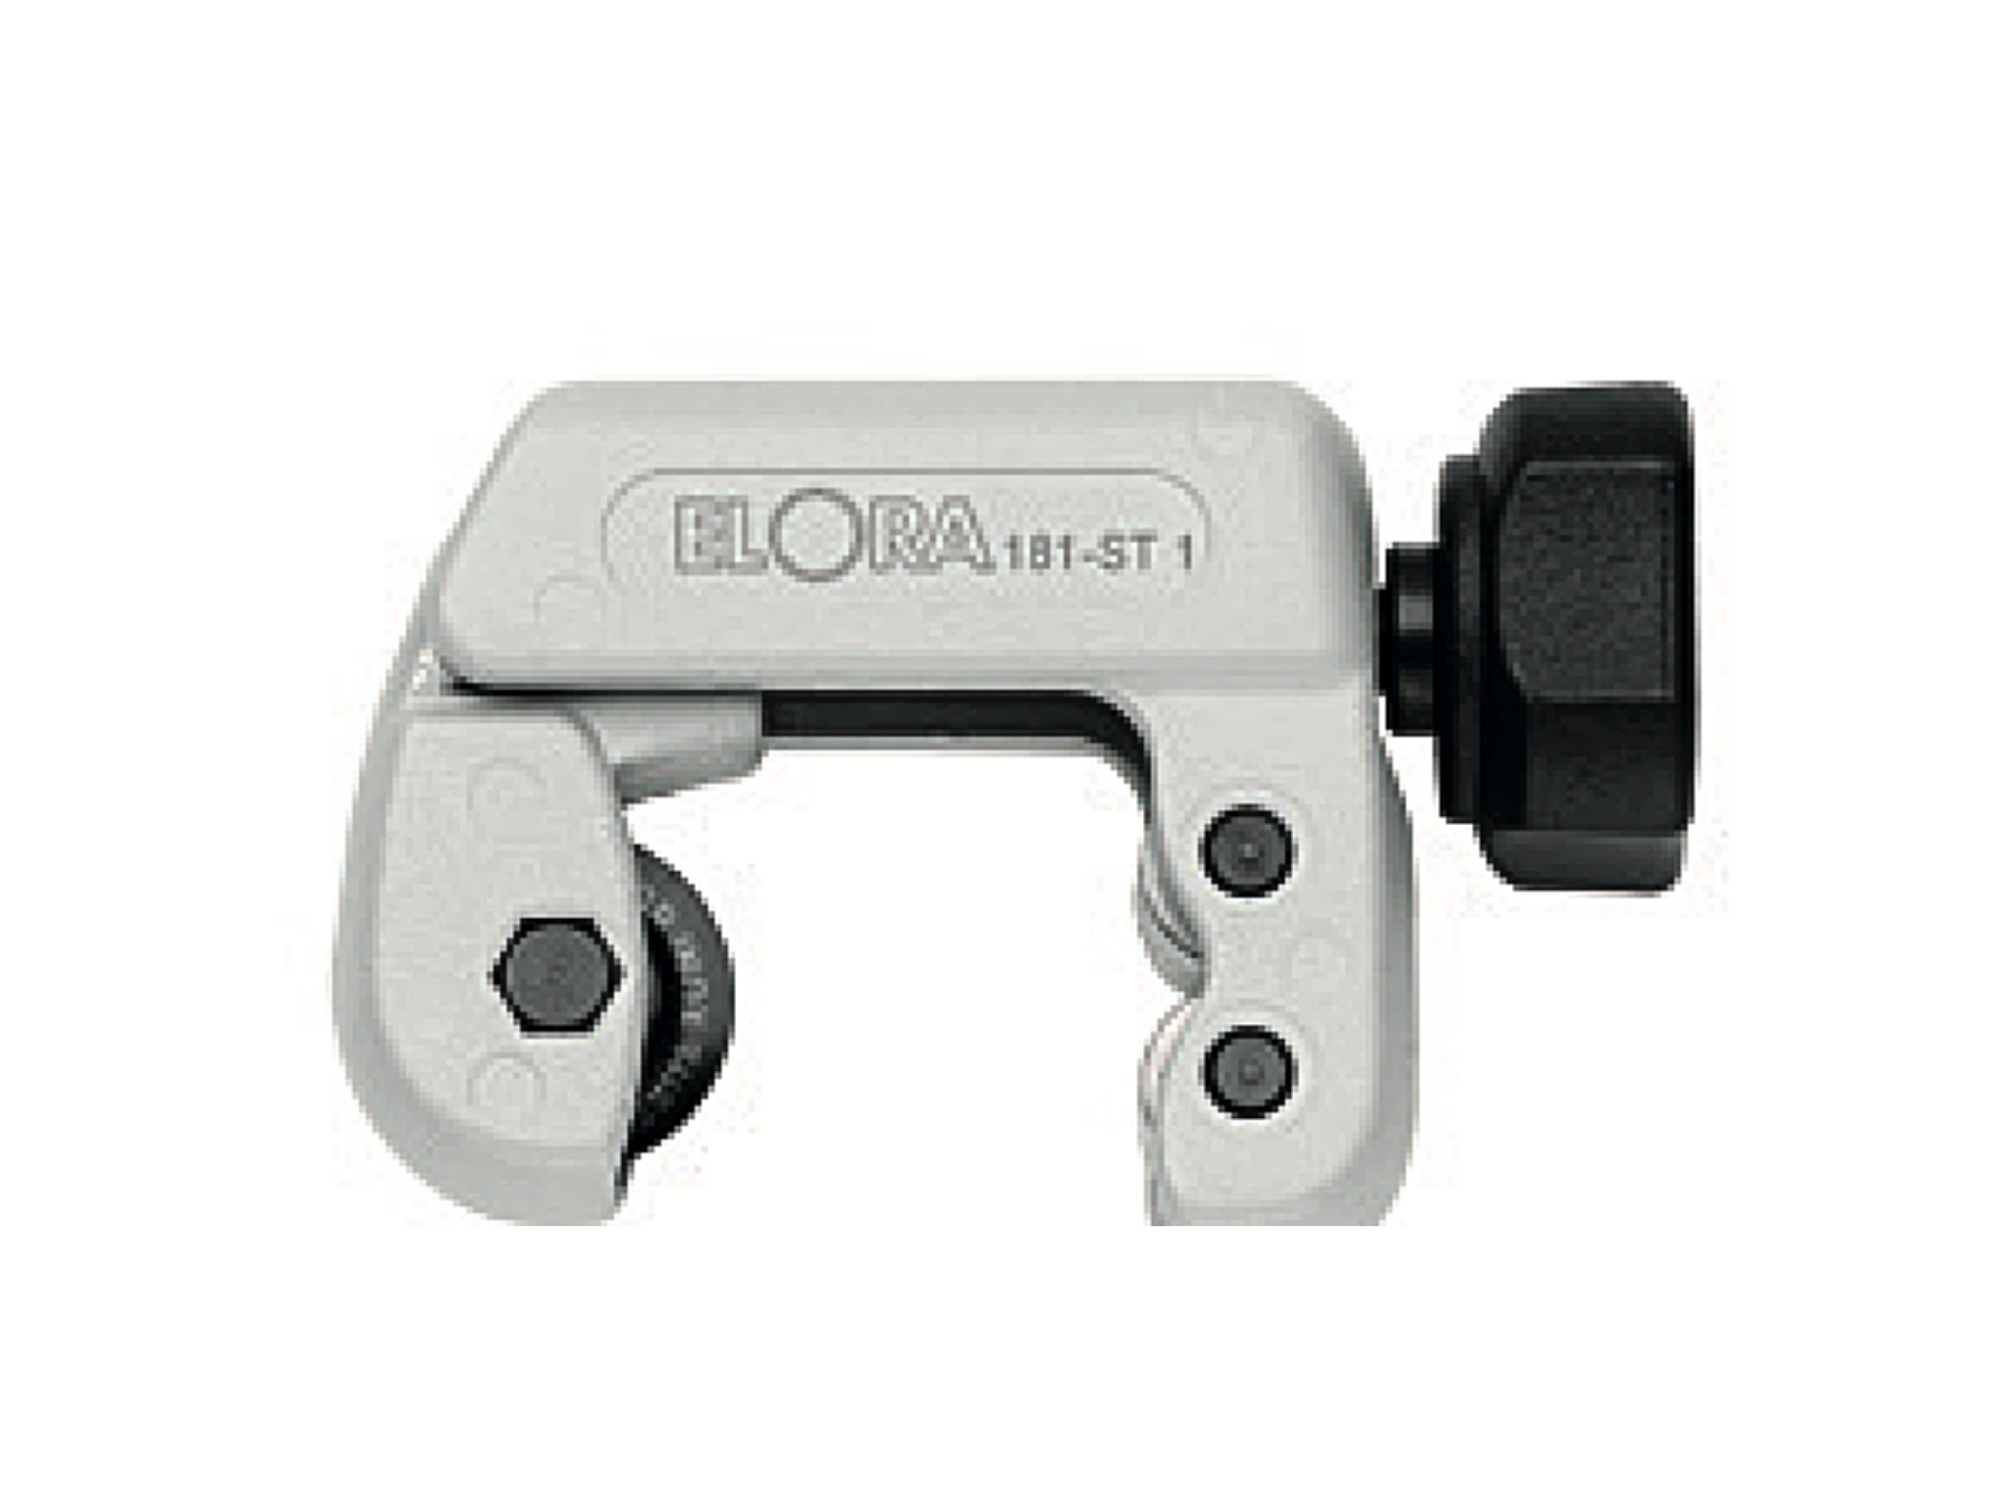 ELORA 181-ST S1/S2 Pipe Cutter Spare Cutting Wheel (ELORA Tools) - Premium Pipe Cutter from ELORA - Shop now at Yew Aik.